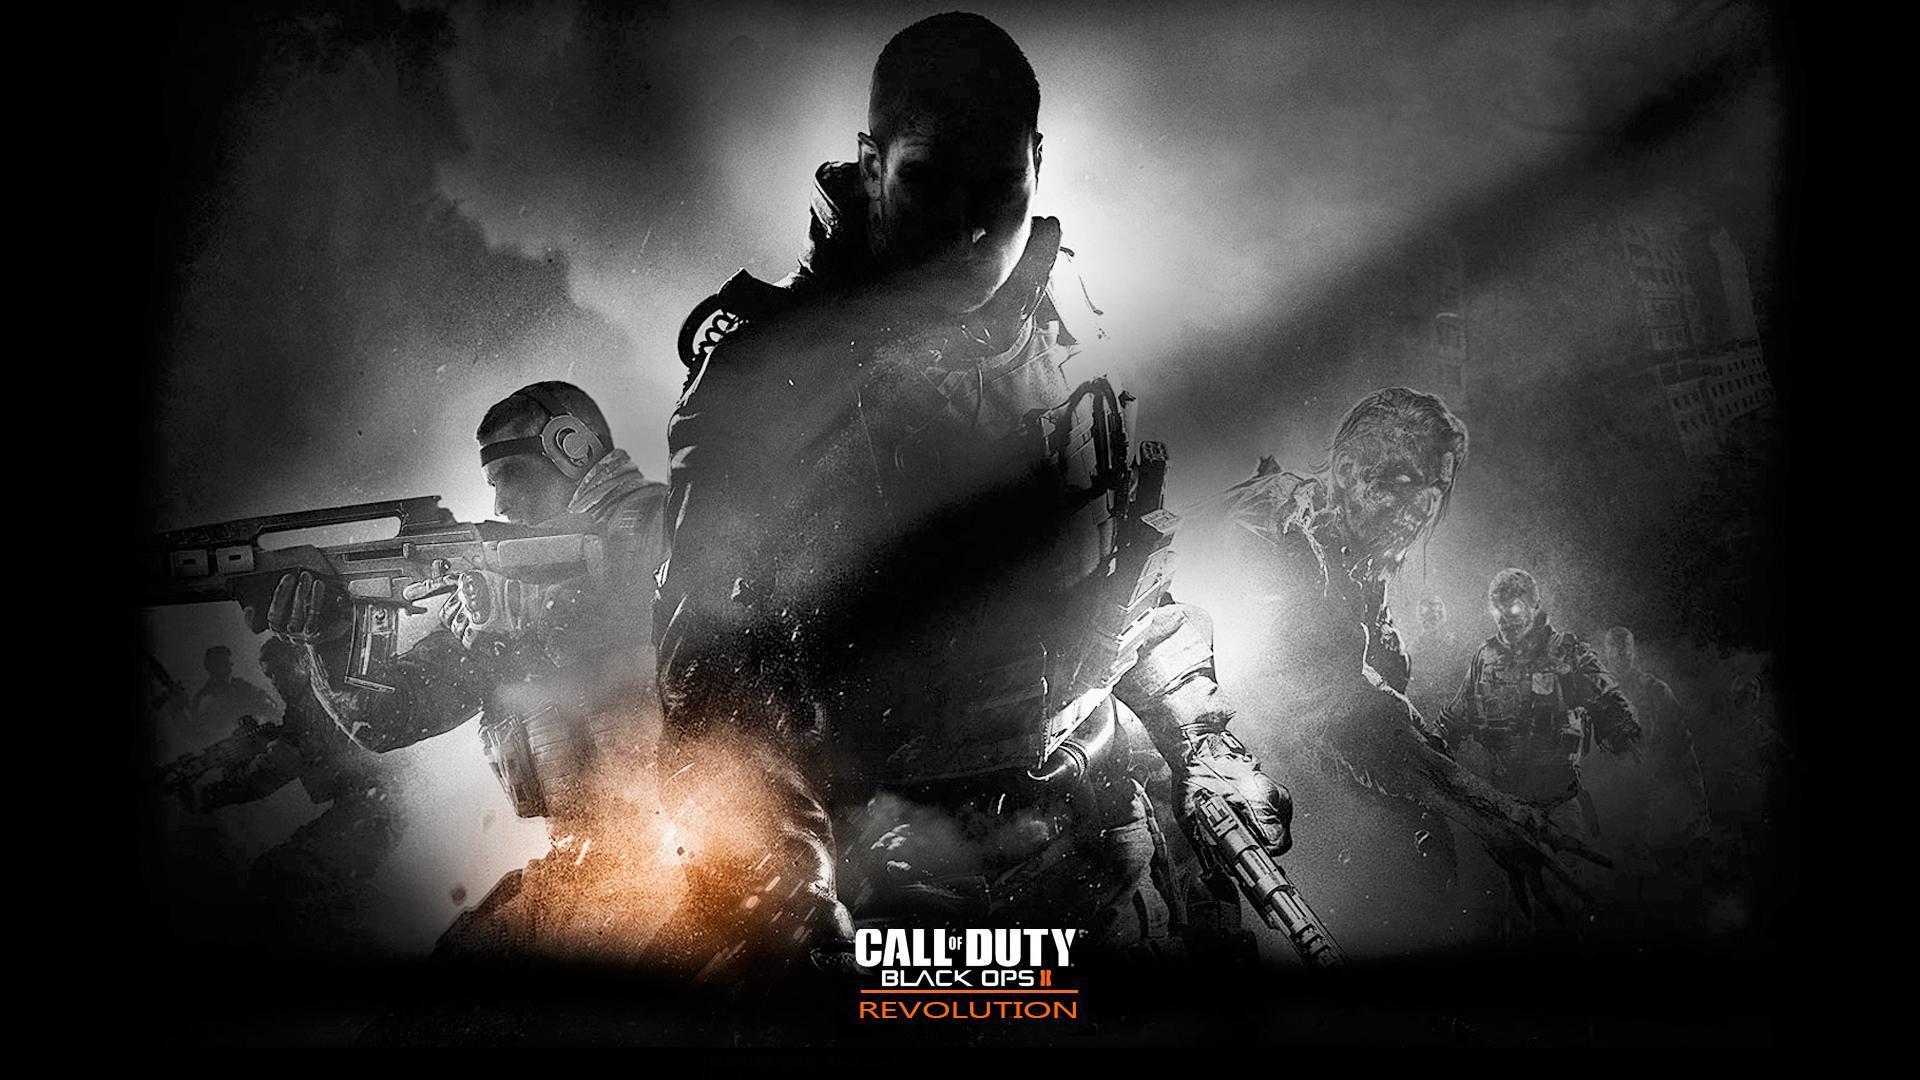 Call of Duty Black Ops Game Wallpapers  HD Wallpapers  ID 9098